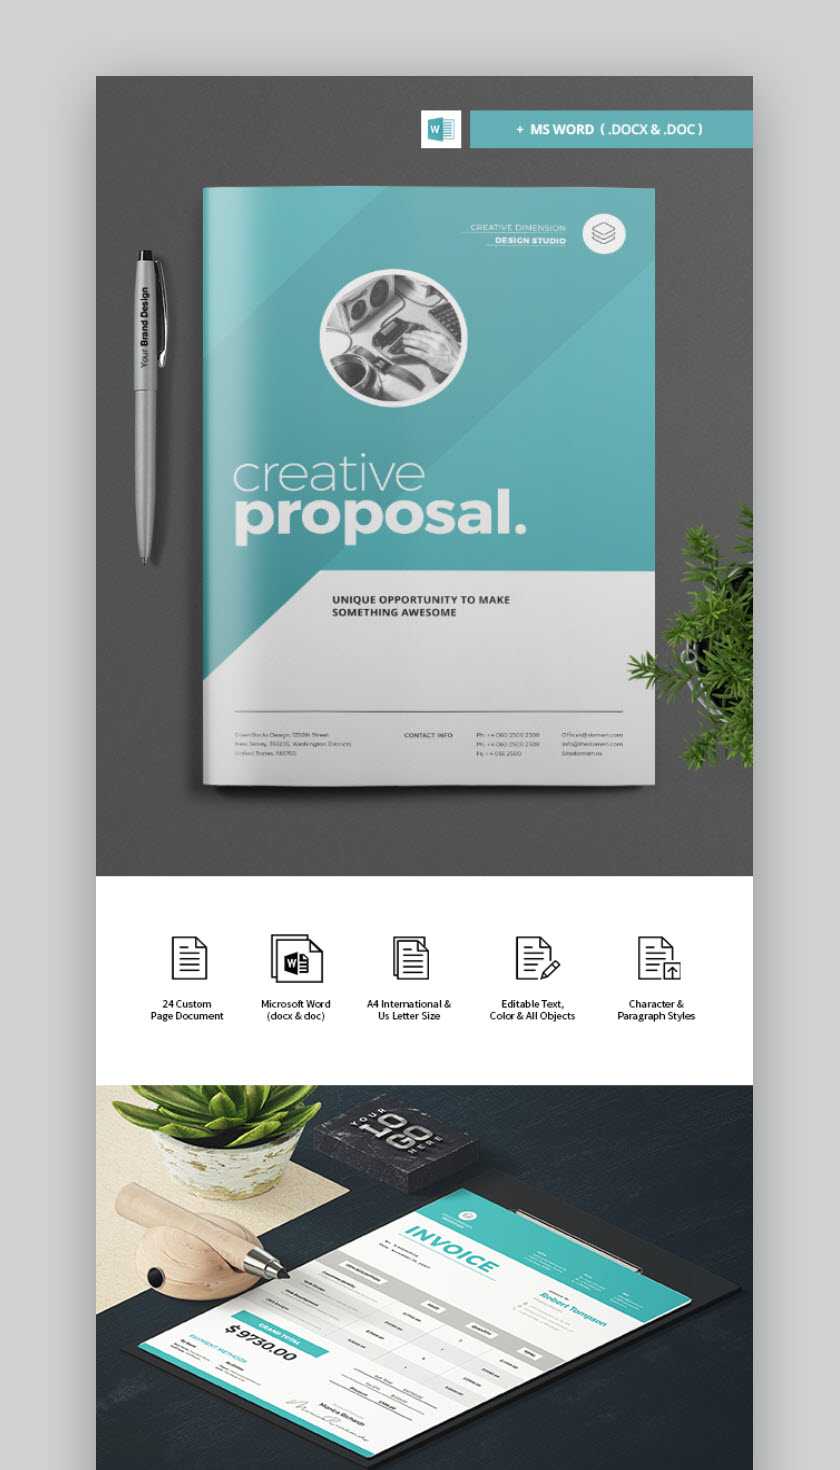 007 Ms Word Proposal Template Ideas Project Frightening Intended For Free Business Proposal Template Ms Word